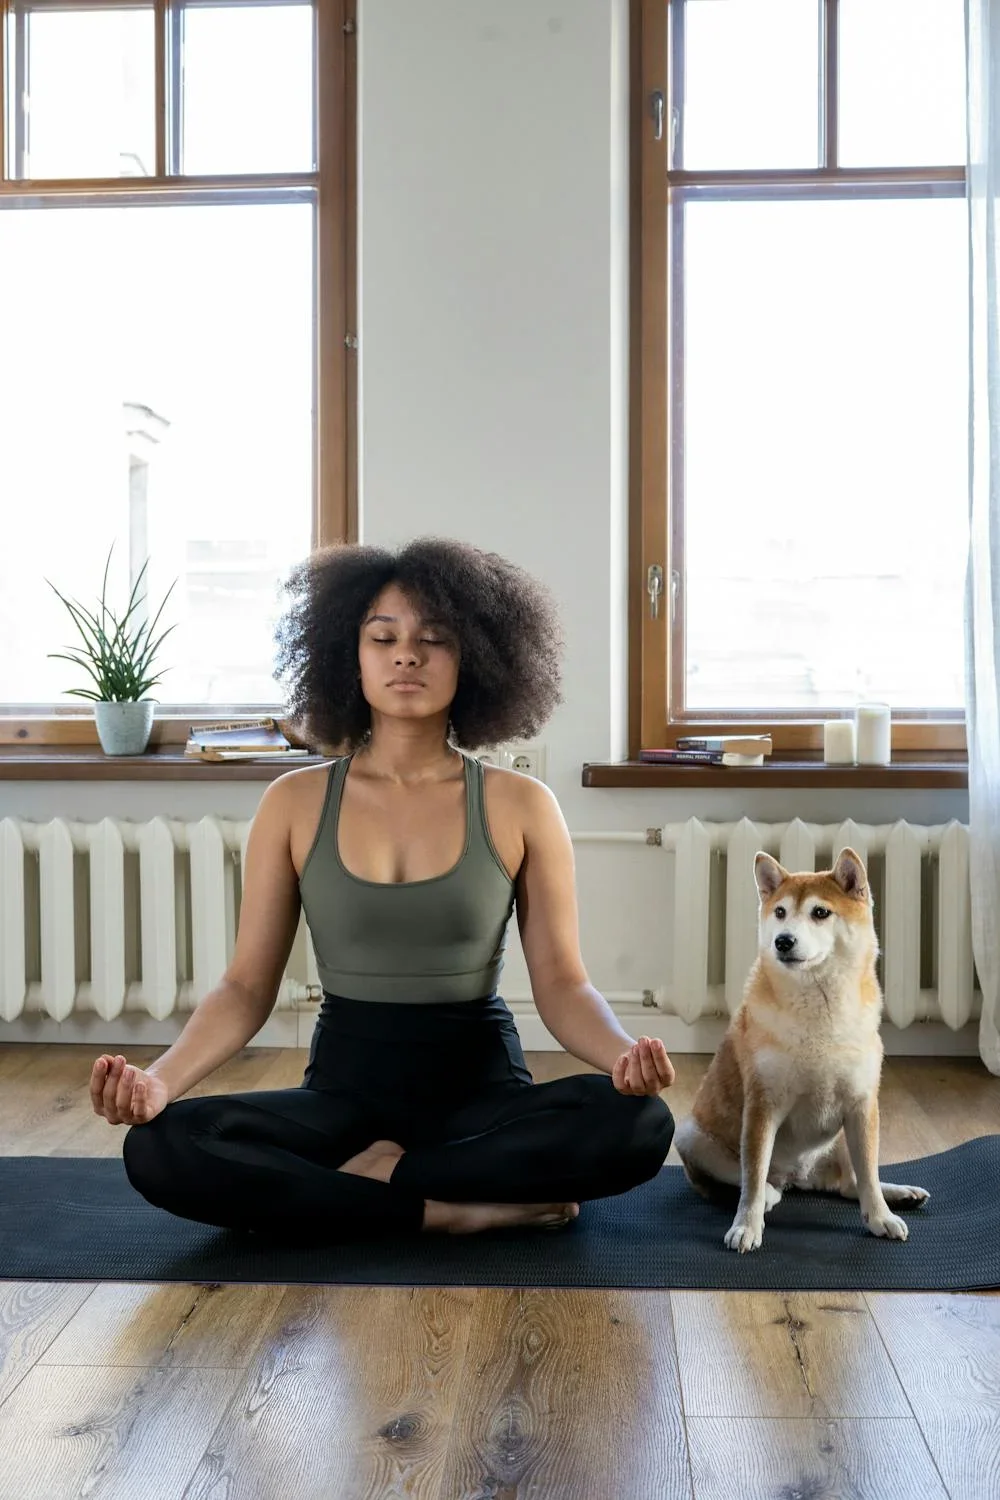 Best Time To Meditate, Plant, Window, Dog, Wood